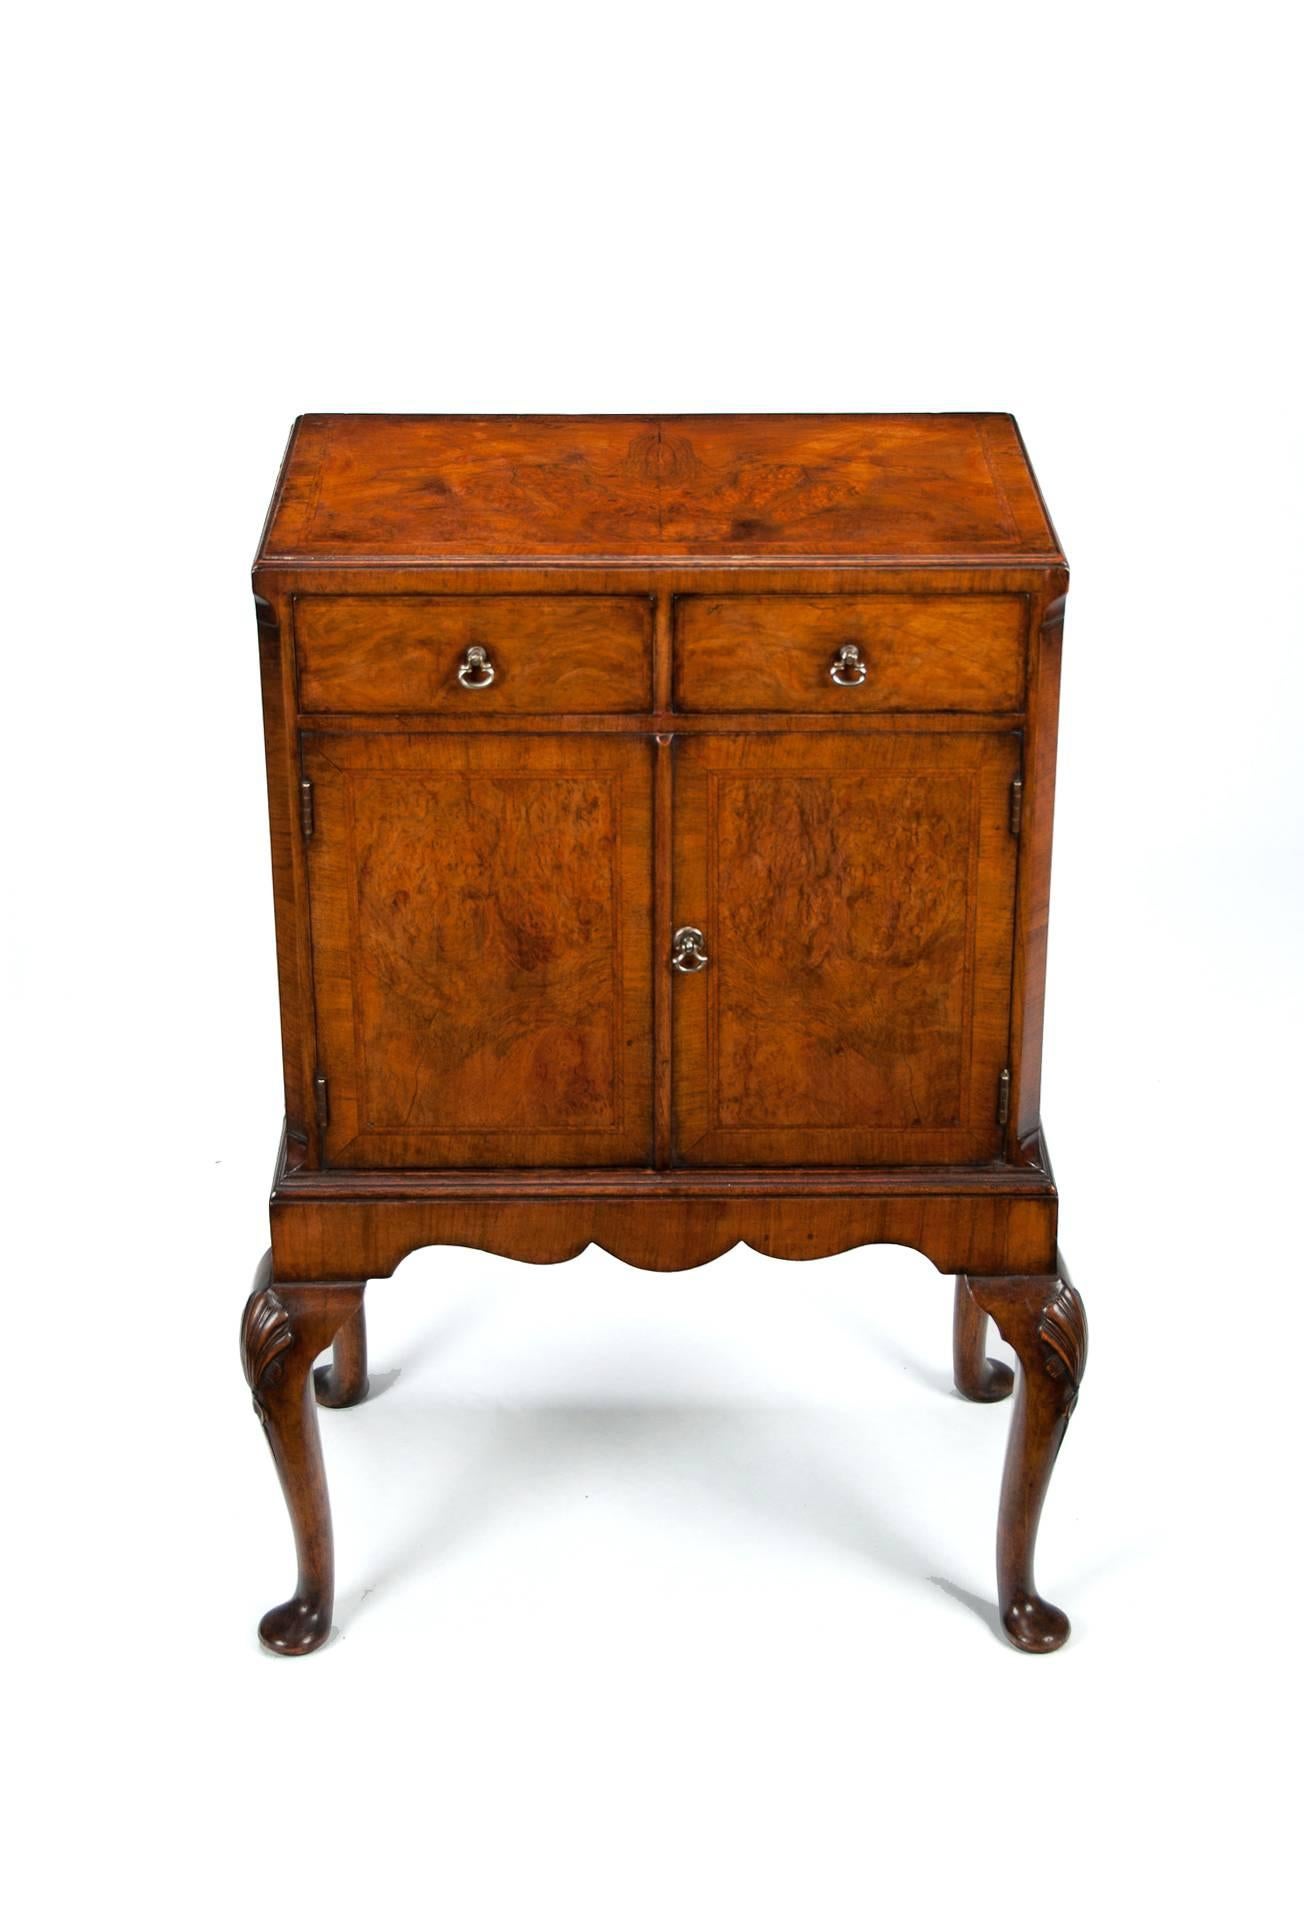 Early 20th Century Antique Figured Walnut Side Cabinet On Cabriole Legs 